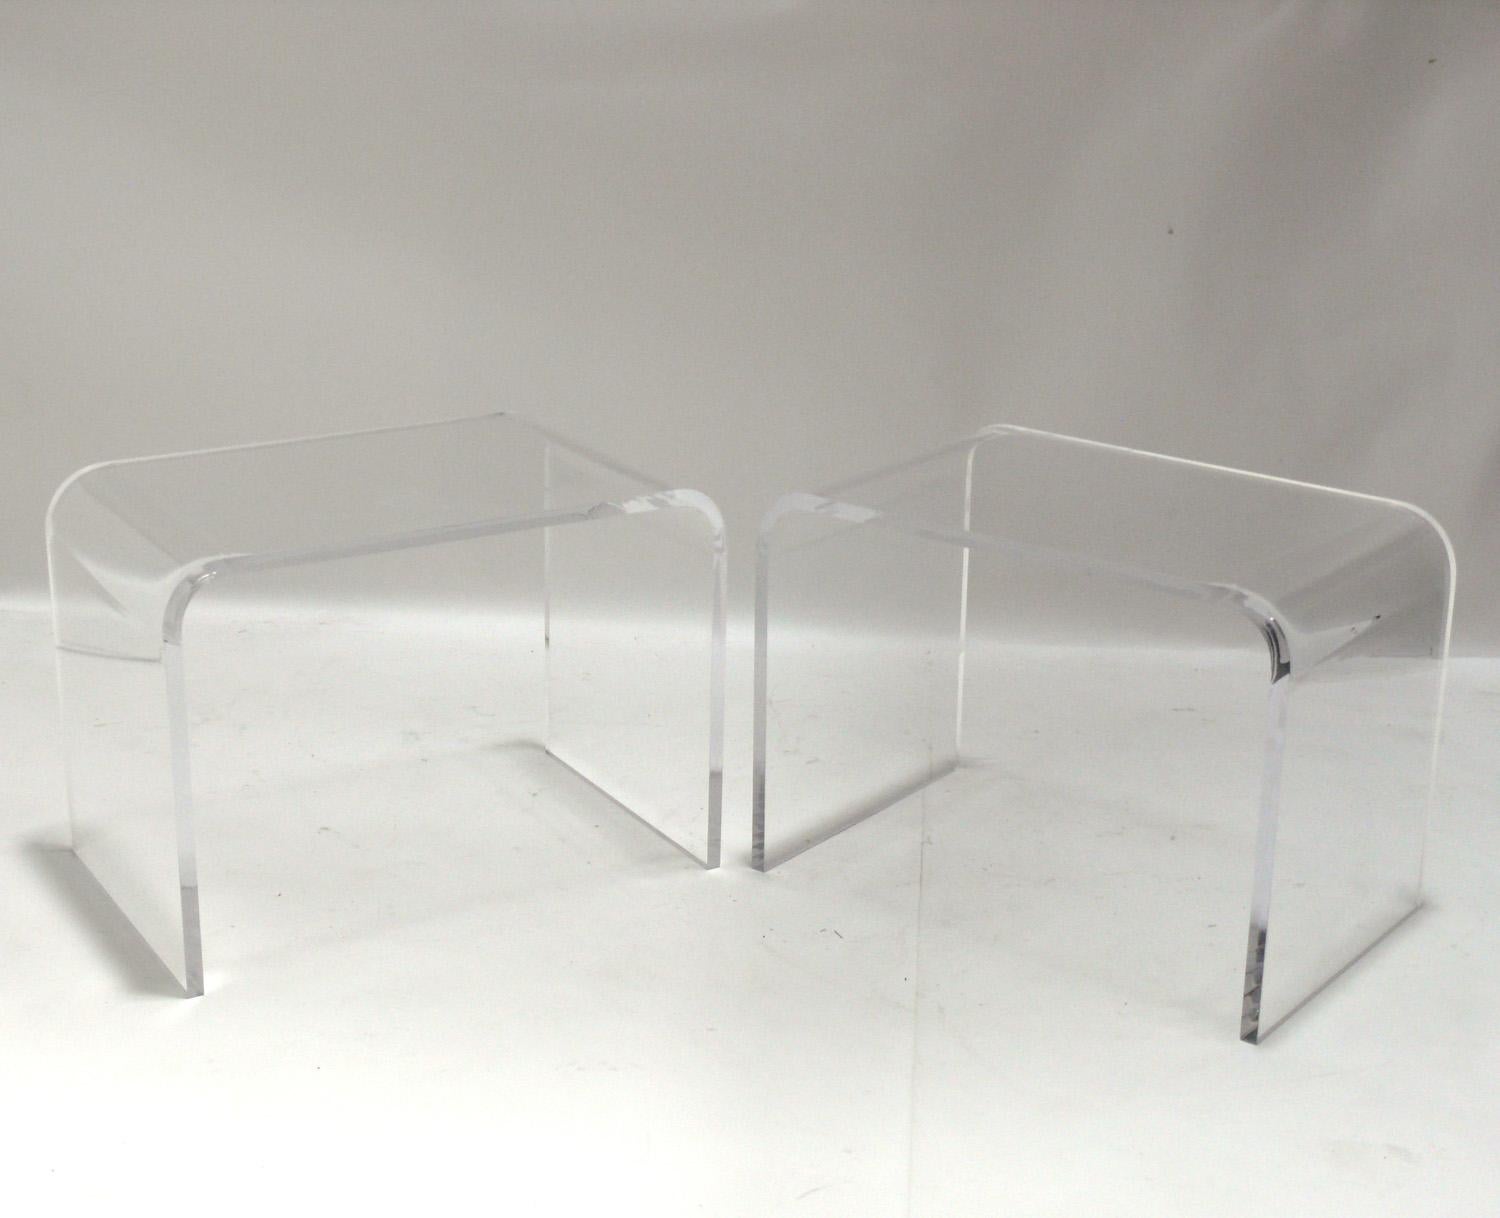 Pair of vintage lucite or acrylic waterfall end tables, American, circa 1970s. High quality heavyweight construction with thick lucite. They are a versatile size and can be used as end or side tables, or as nightstands. They have been cleaned and